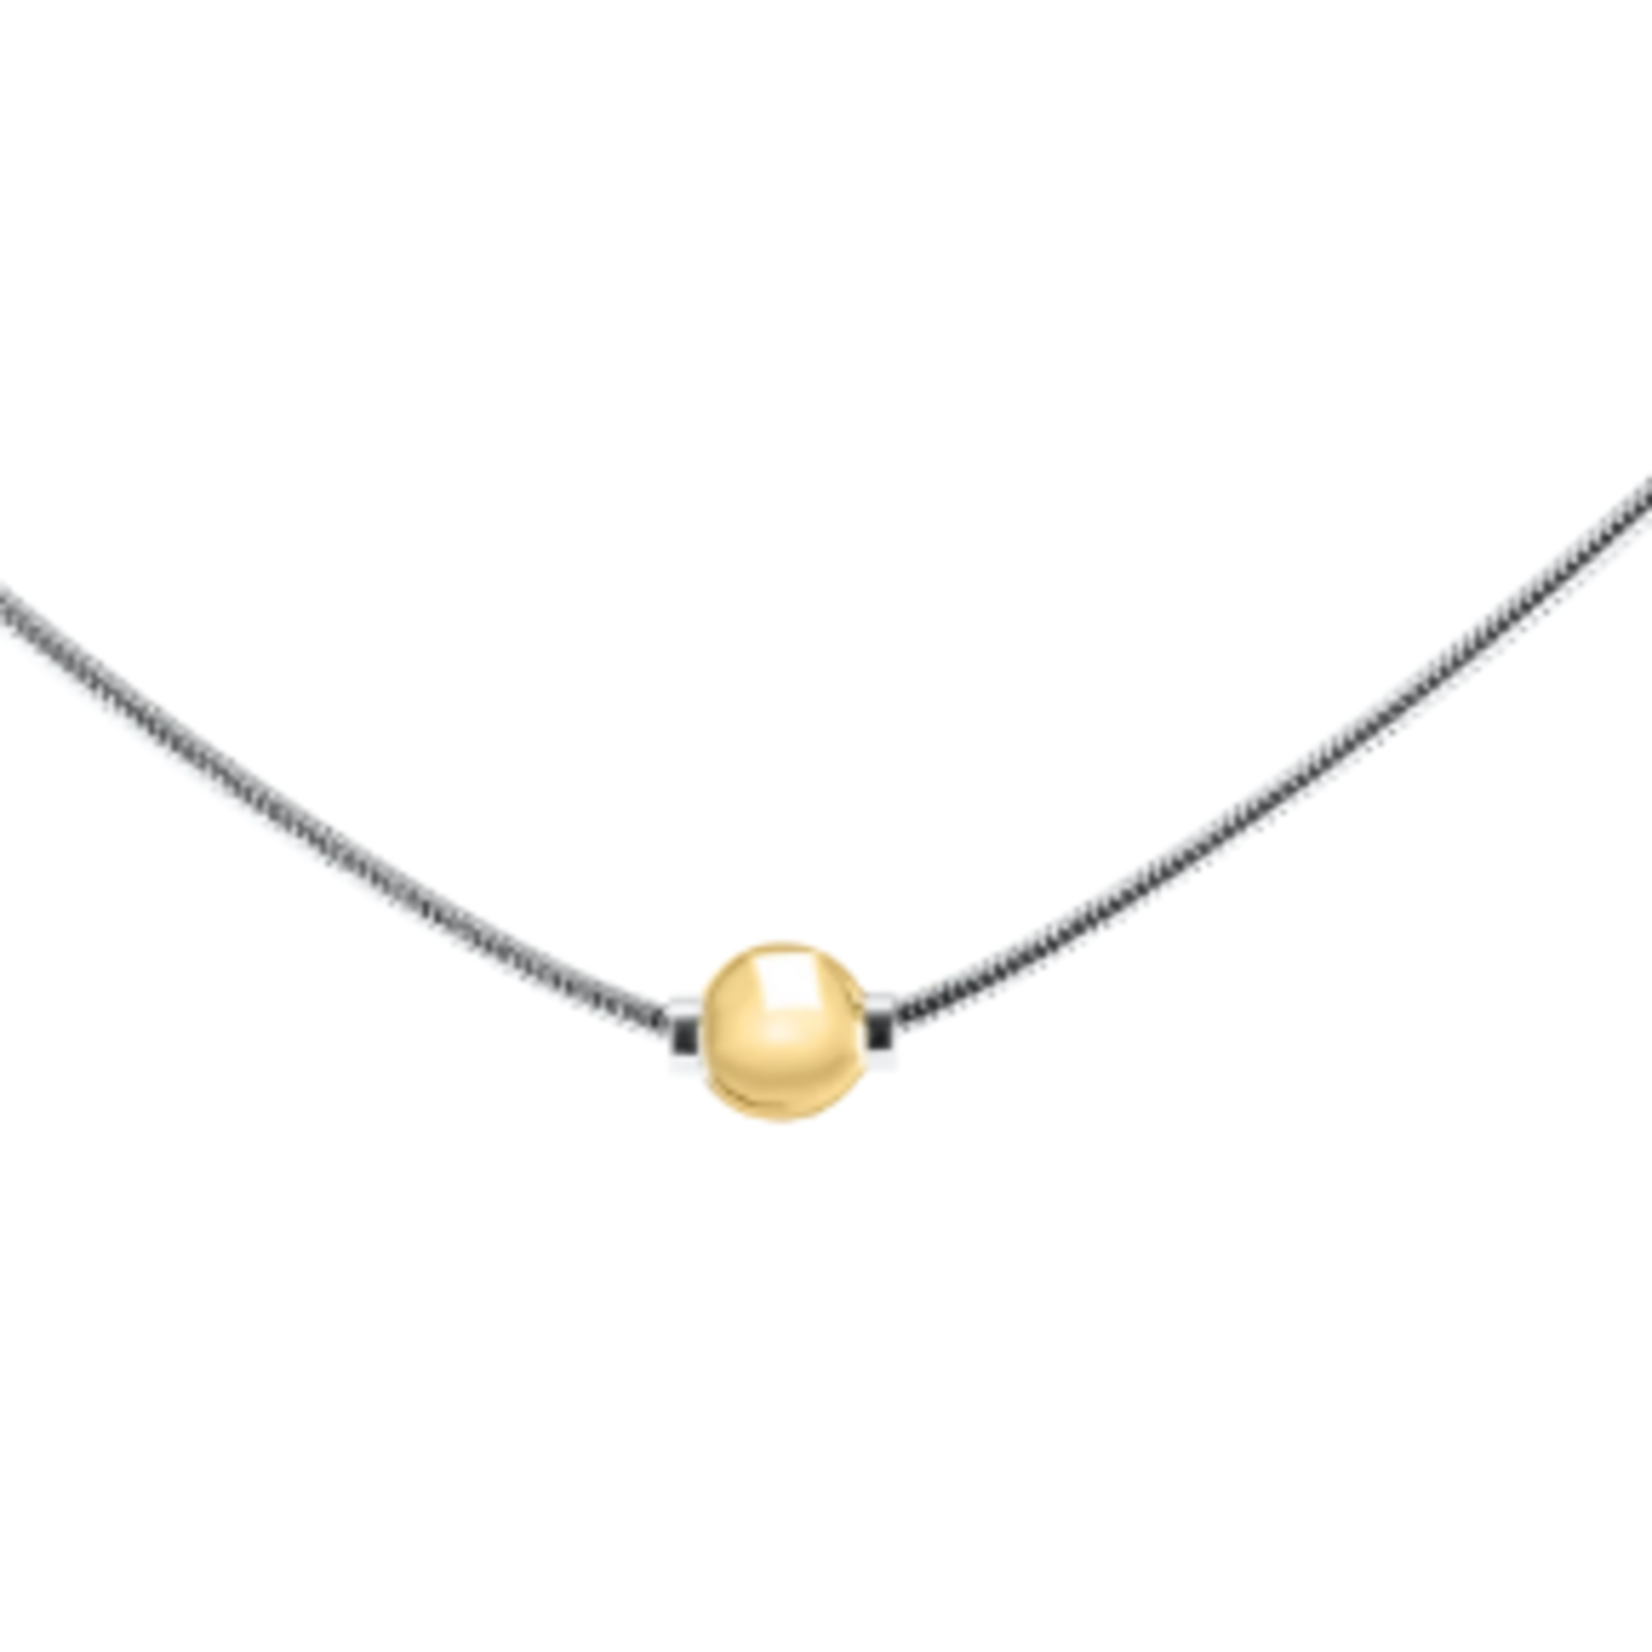 Marathon Jewelry Cape Cod Necklace, 14K Yellow Gold Bead on 18" Sterling Snake Chain